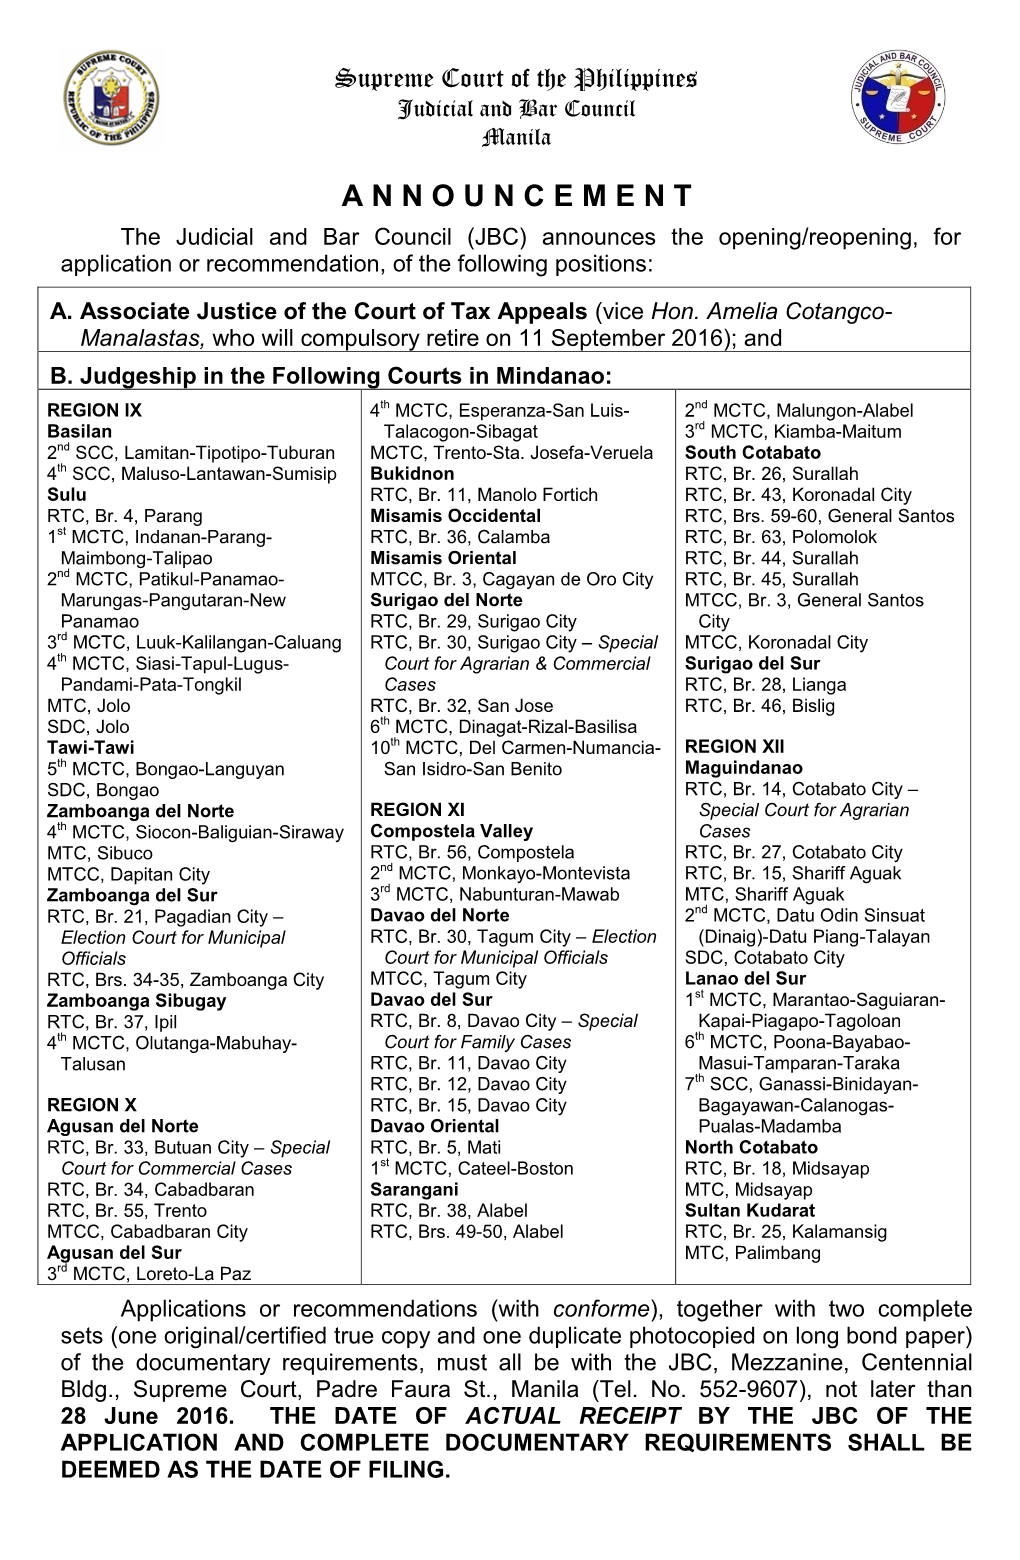 A N N O U N C E M E N T the Judicial and Bar Council (JBC) Announces the Opening/Reopening, for Application Or Recommendation, of the Following Positions